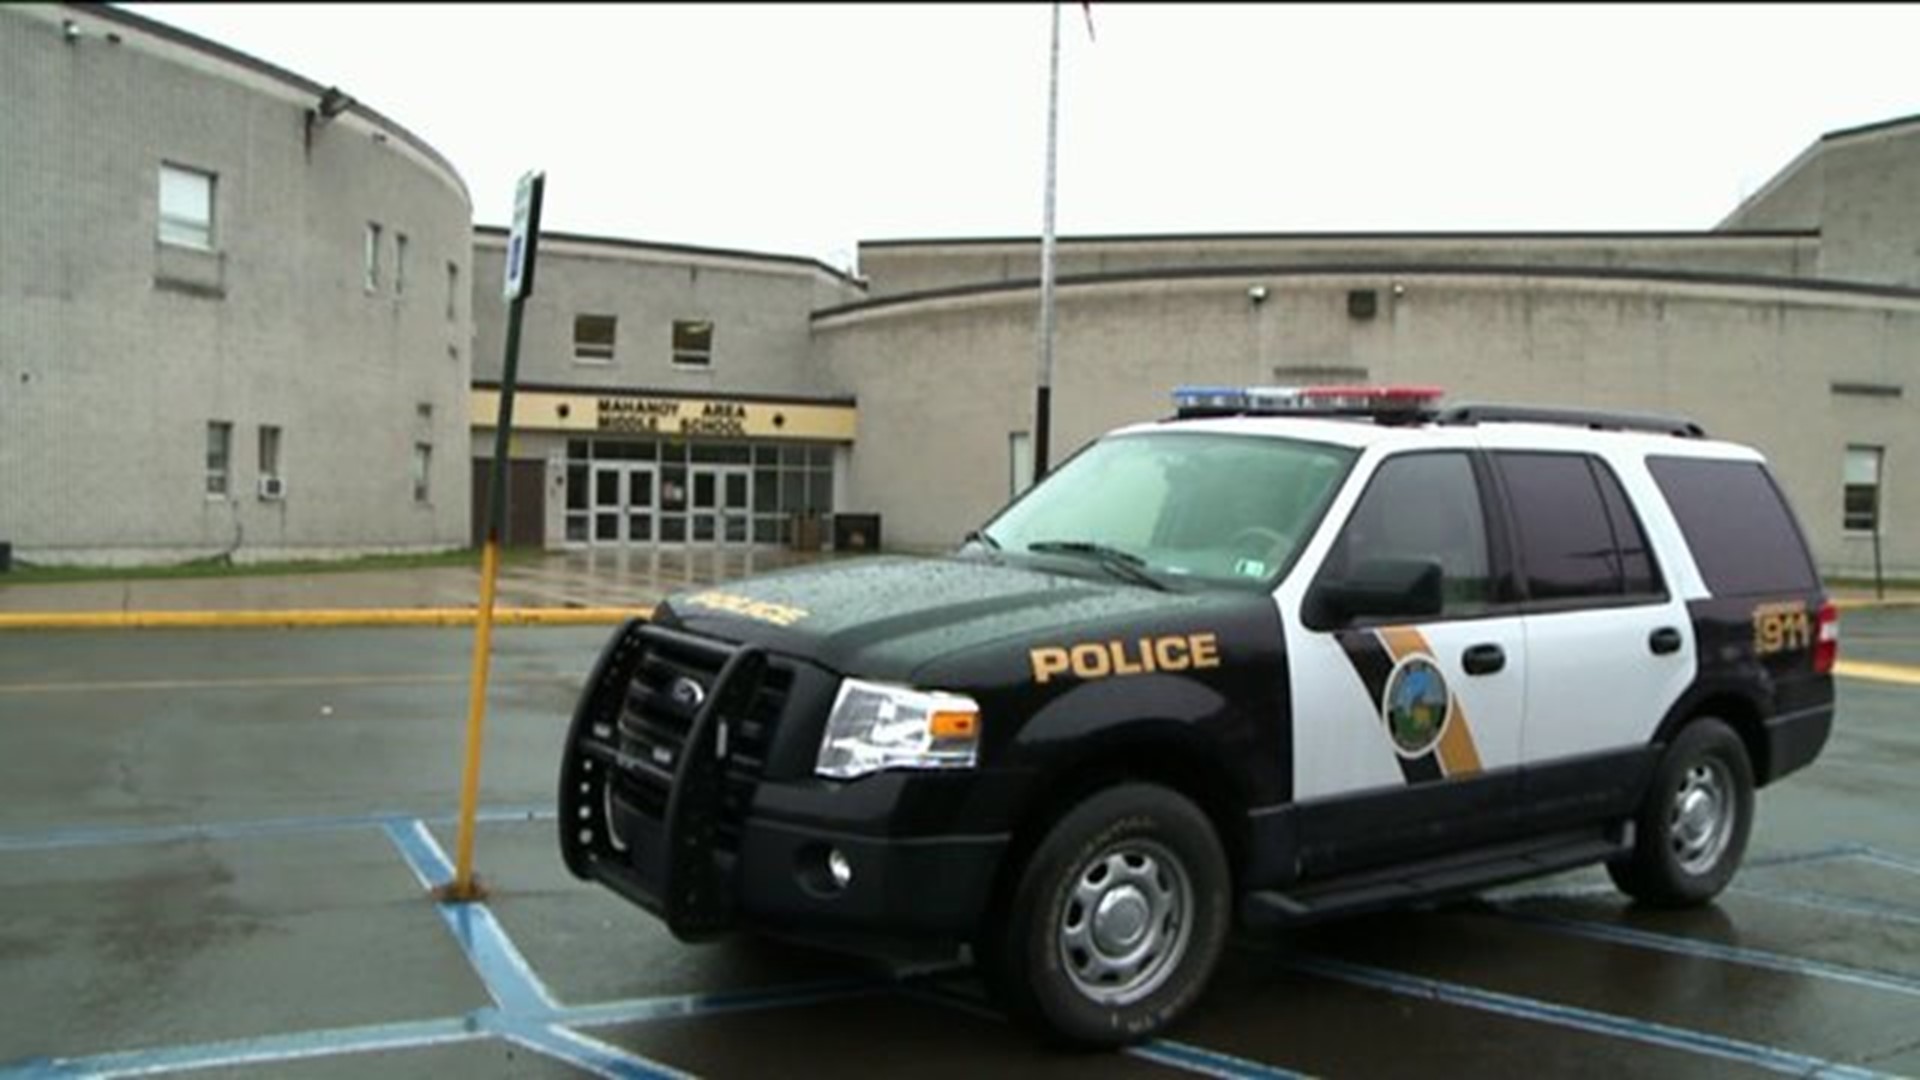 Two Bomb Threats In Two Days At School; Police Investigating